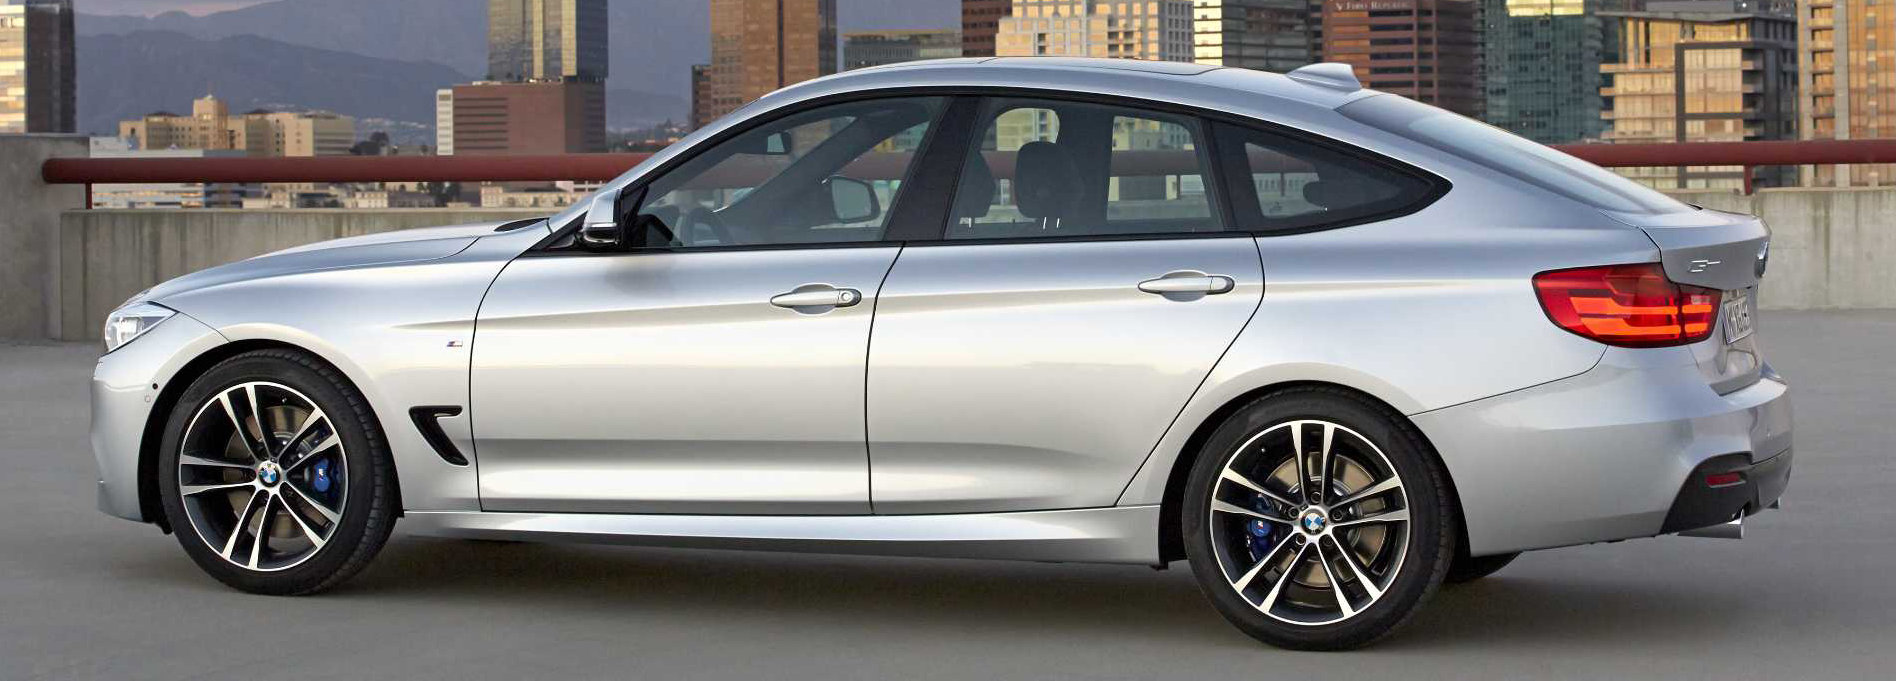 Get Your $50,000 Hatchback Here - The New York Times